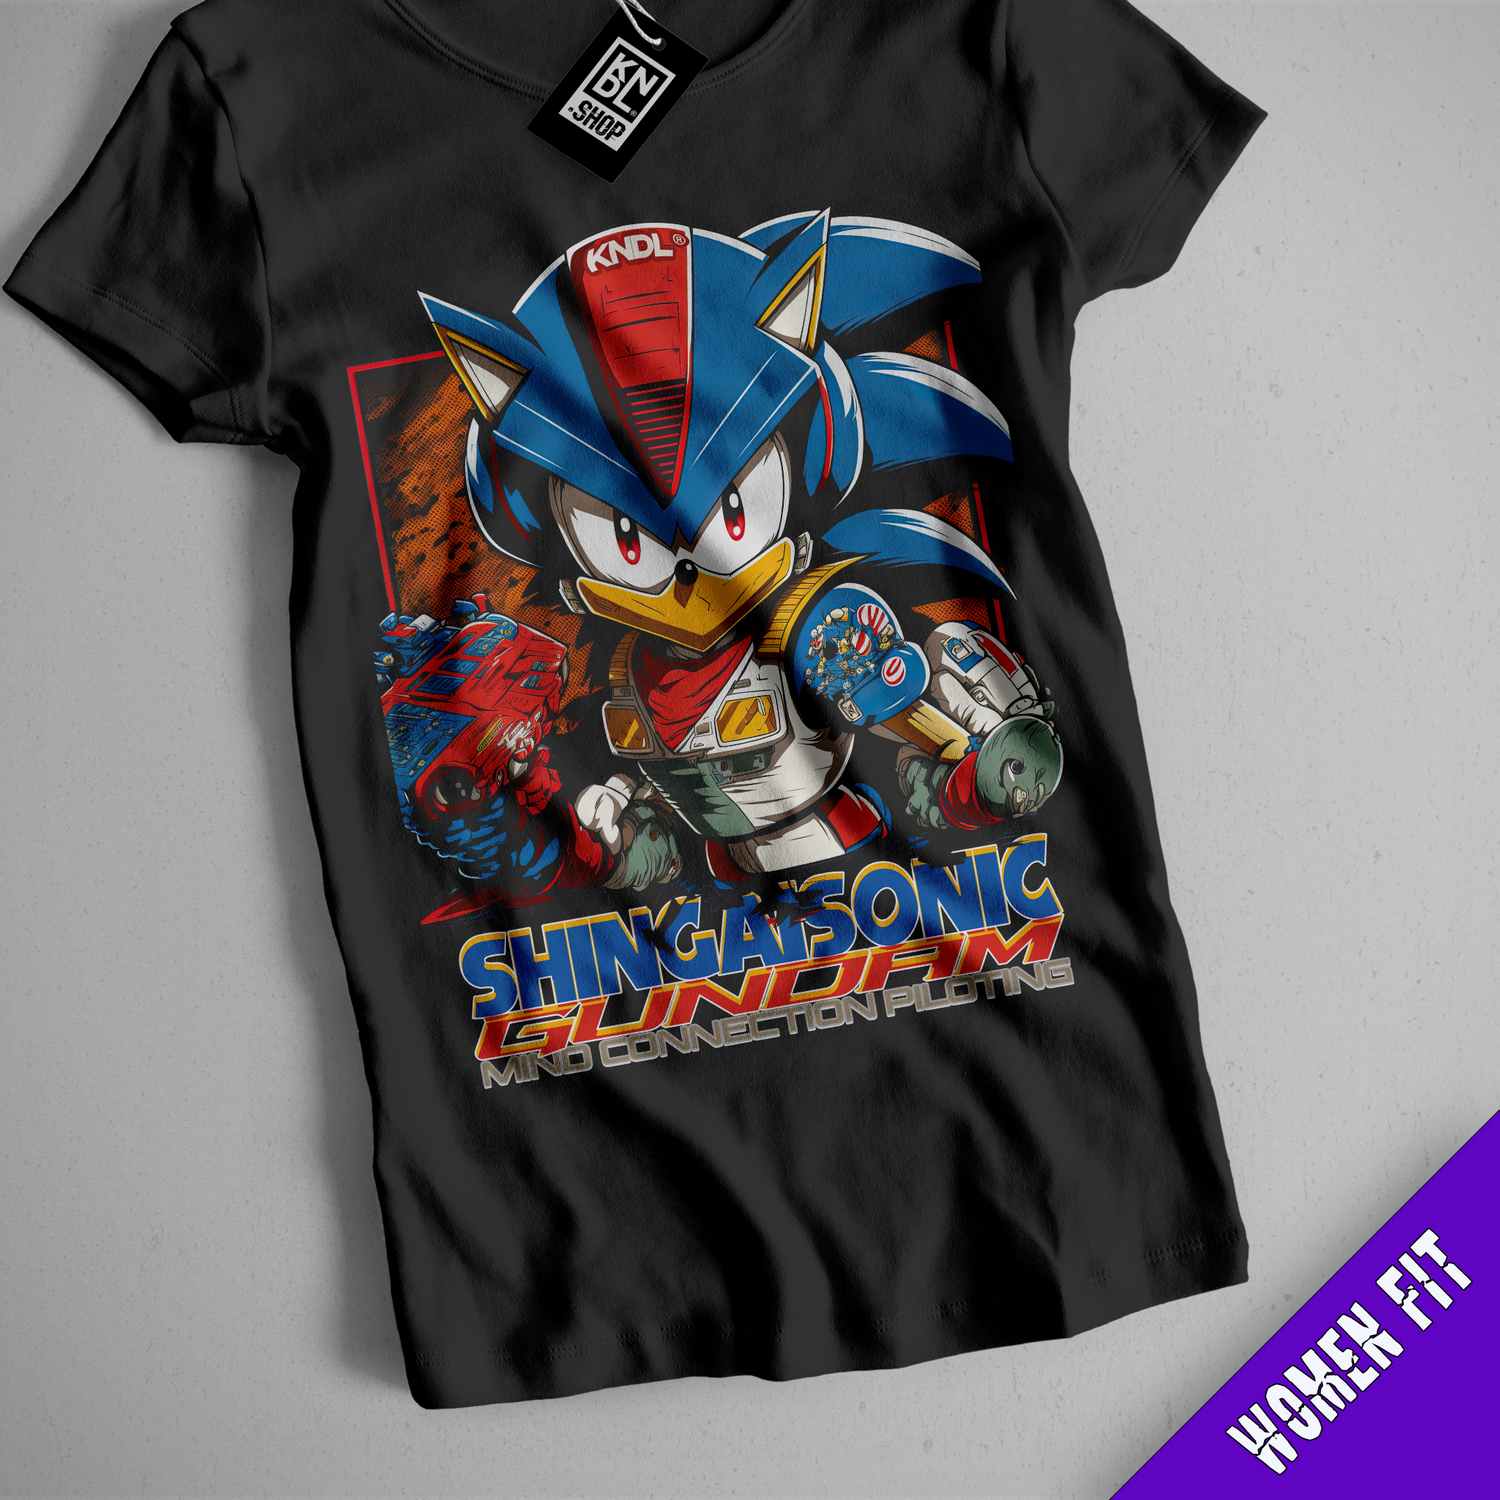 a black shirt with a picture of sonic the hedgehog on it